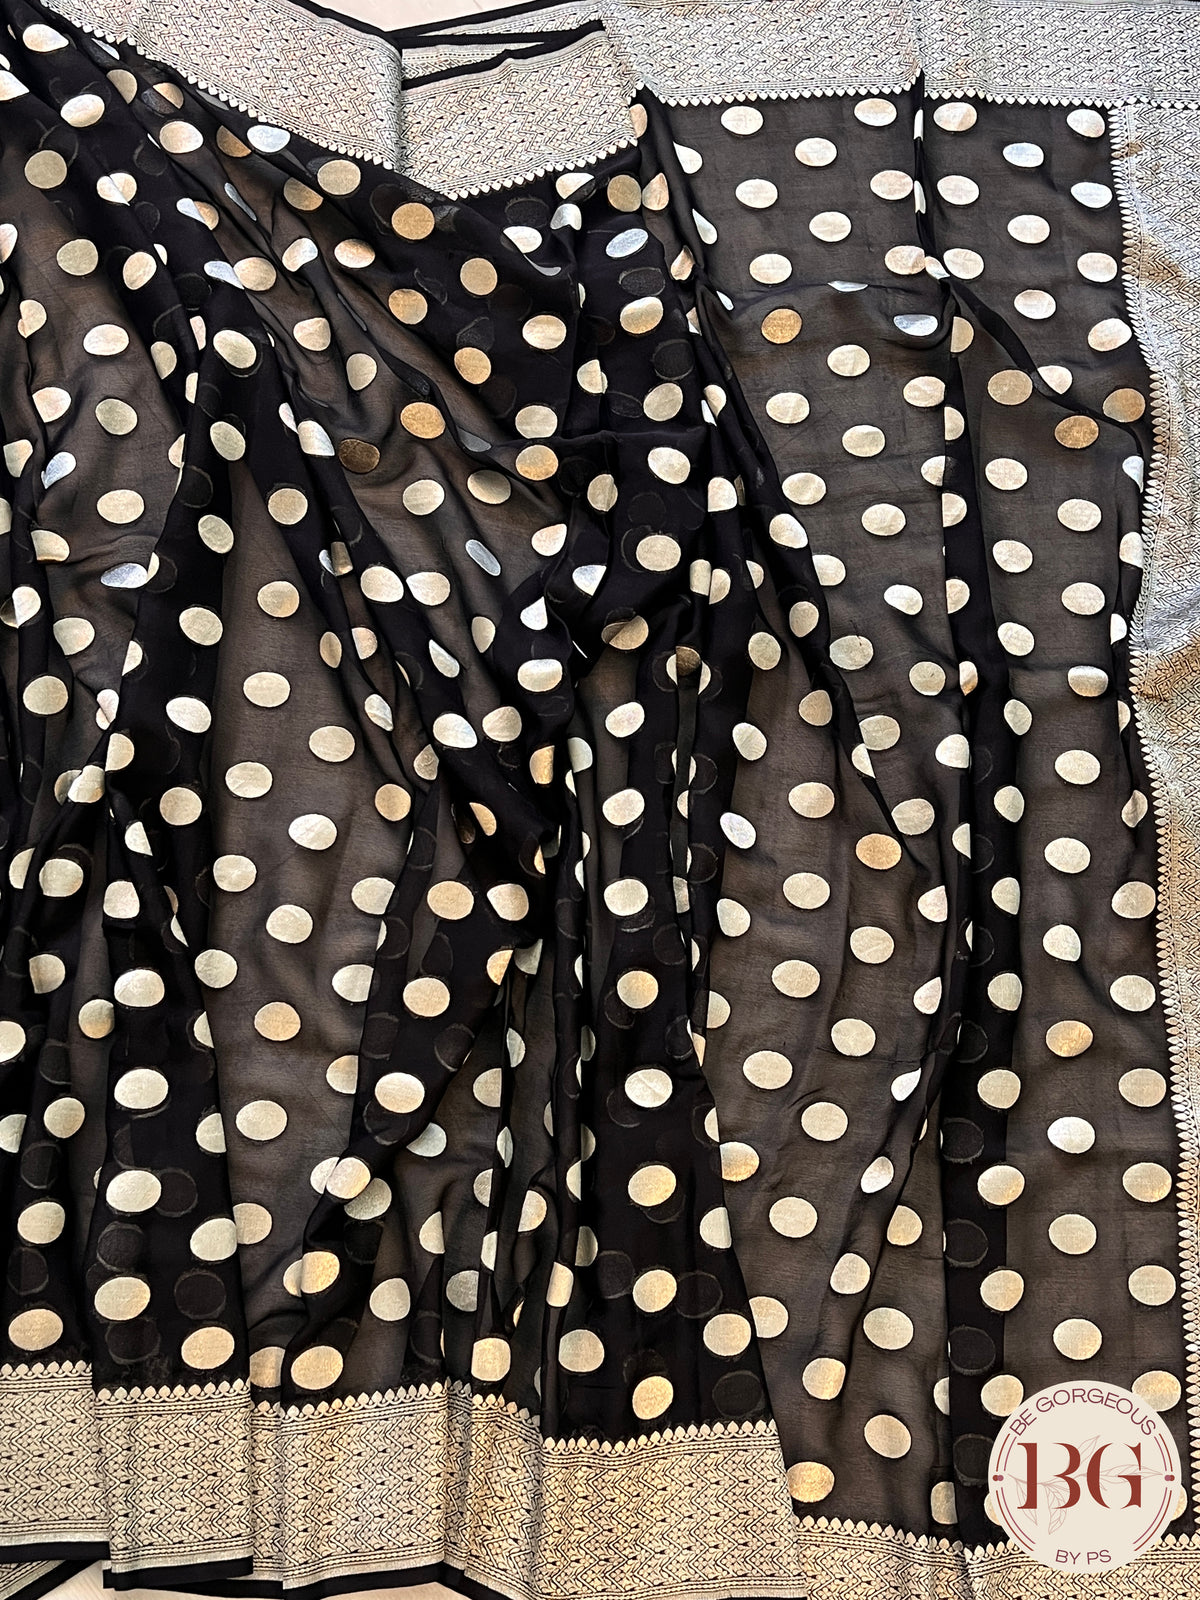 Banarasi Handwoven Georgette silk with gold zari weaved saree, polka dots and stitched blouse black